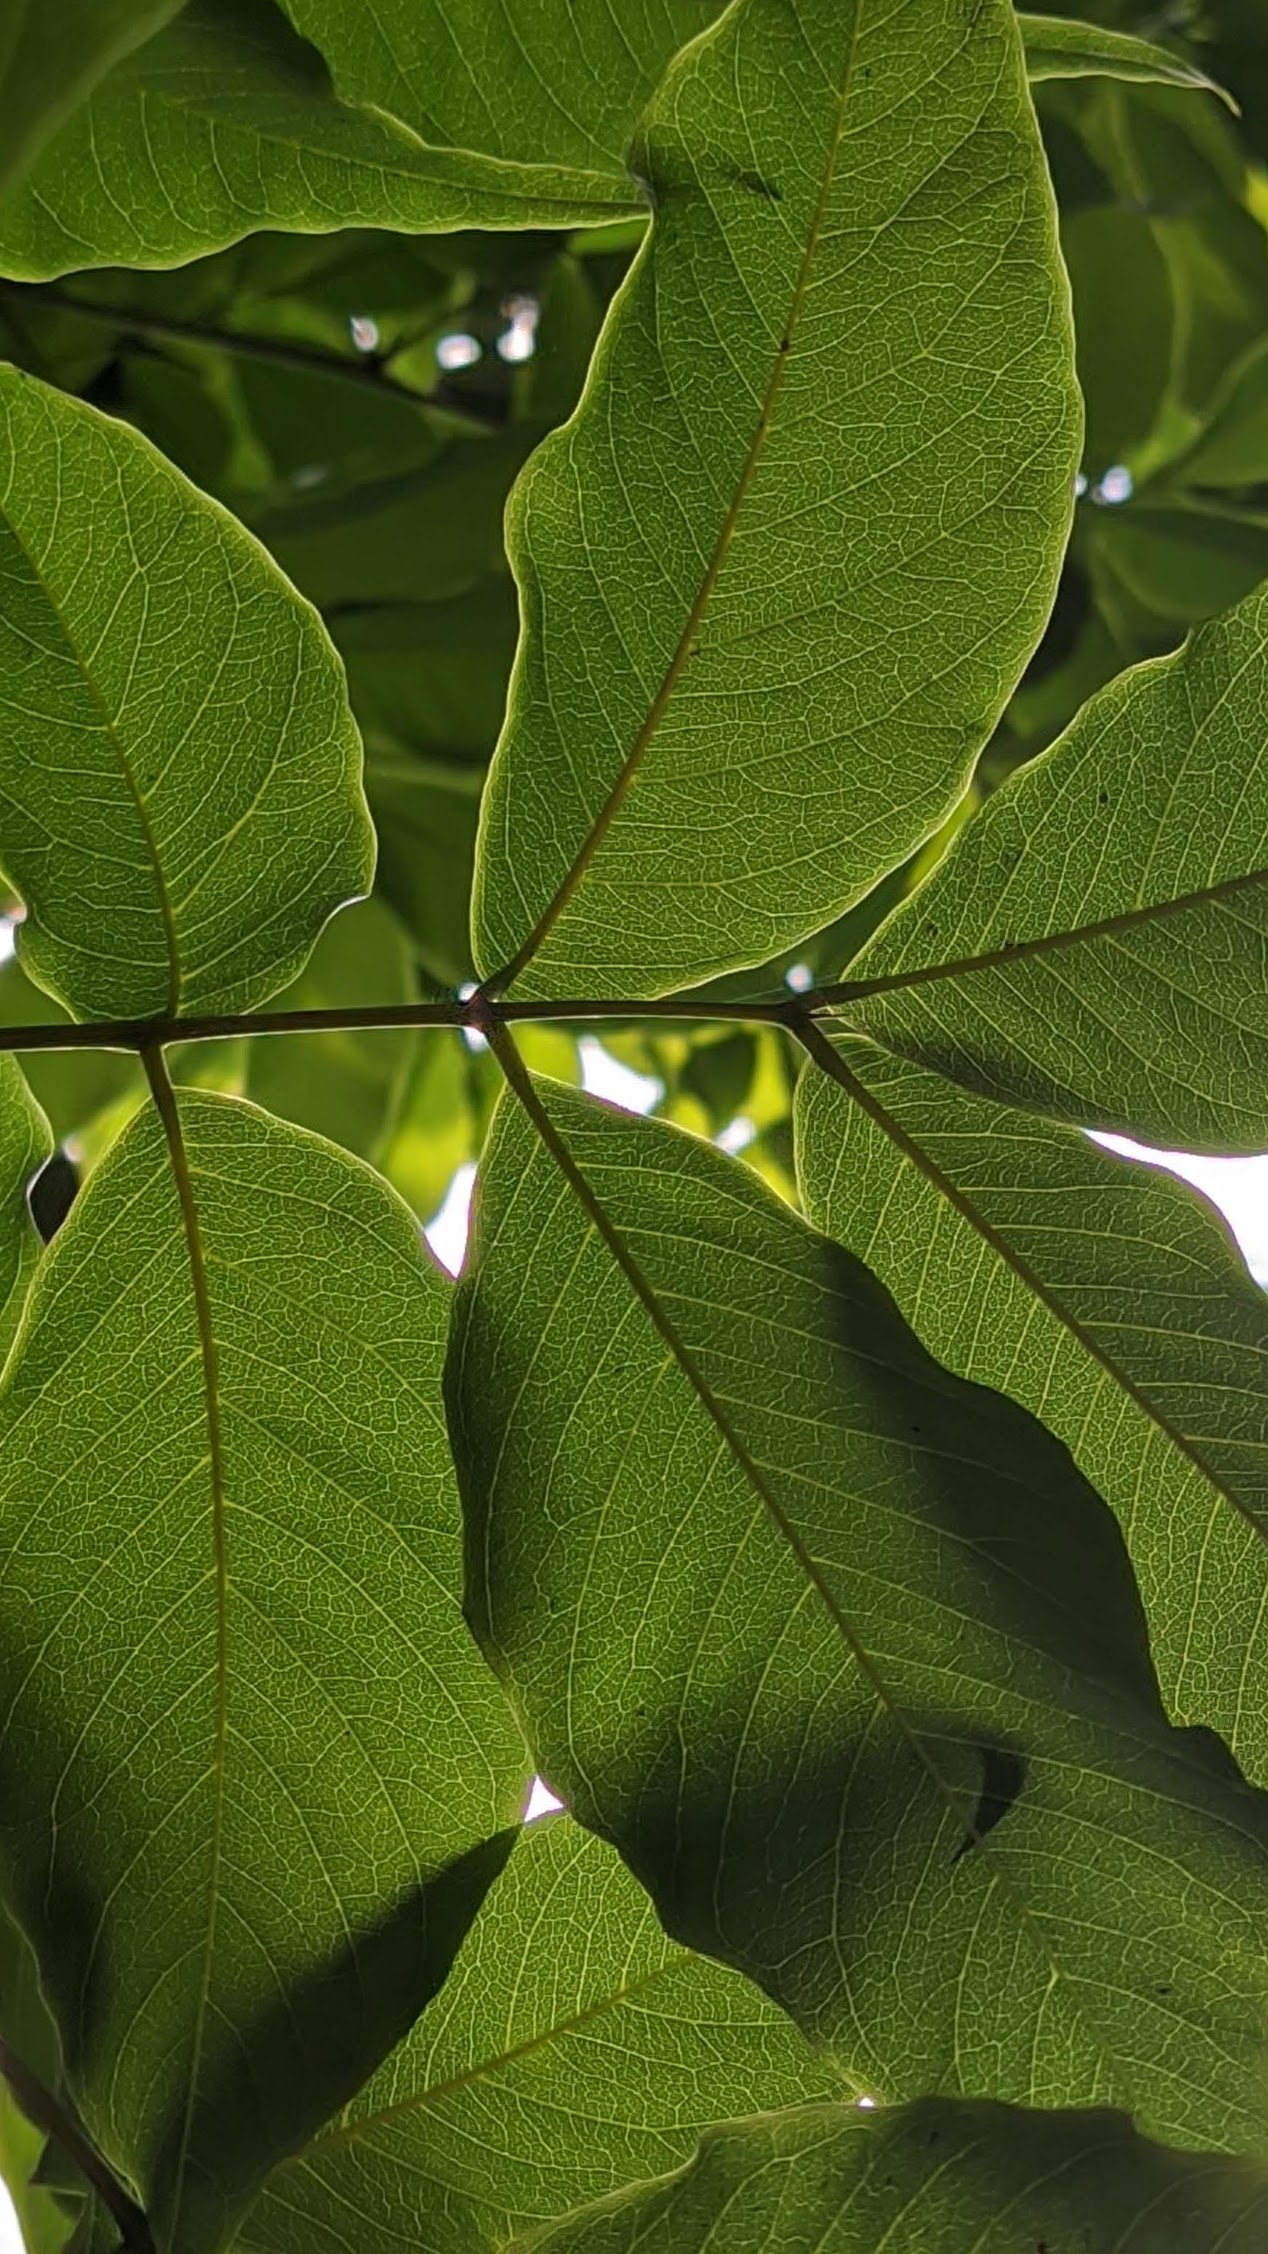 Leaves of a plant